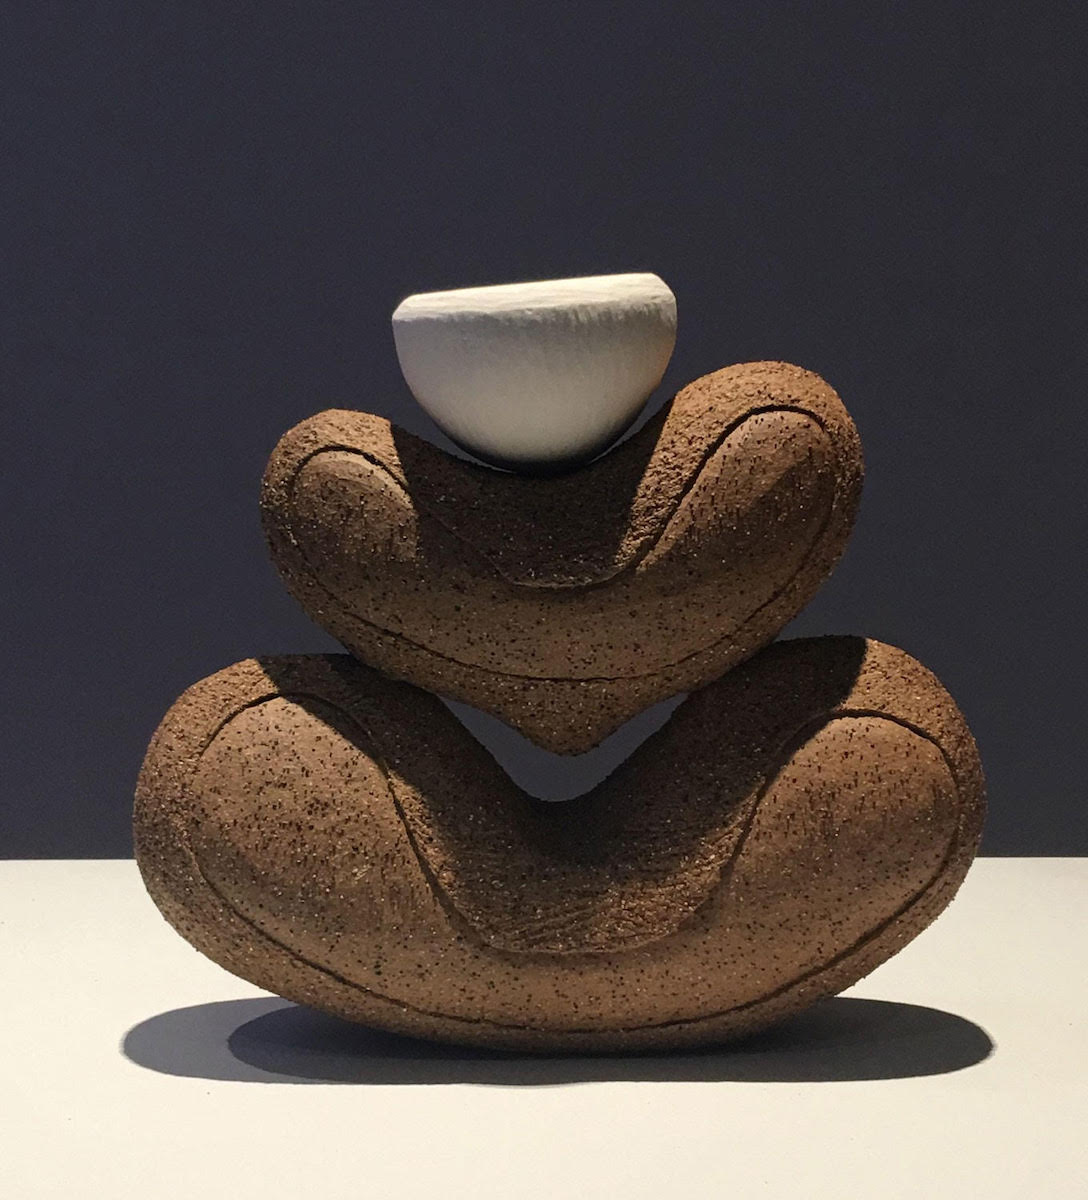 A large, abstract sculpture made of clay in brown and cream two-tone, with three segments getting smaller in size as it ascends.